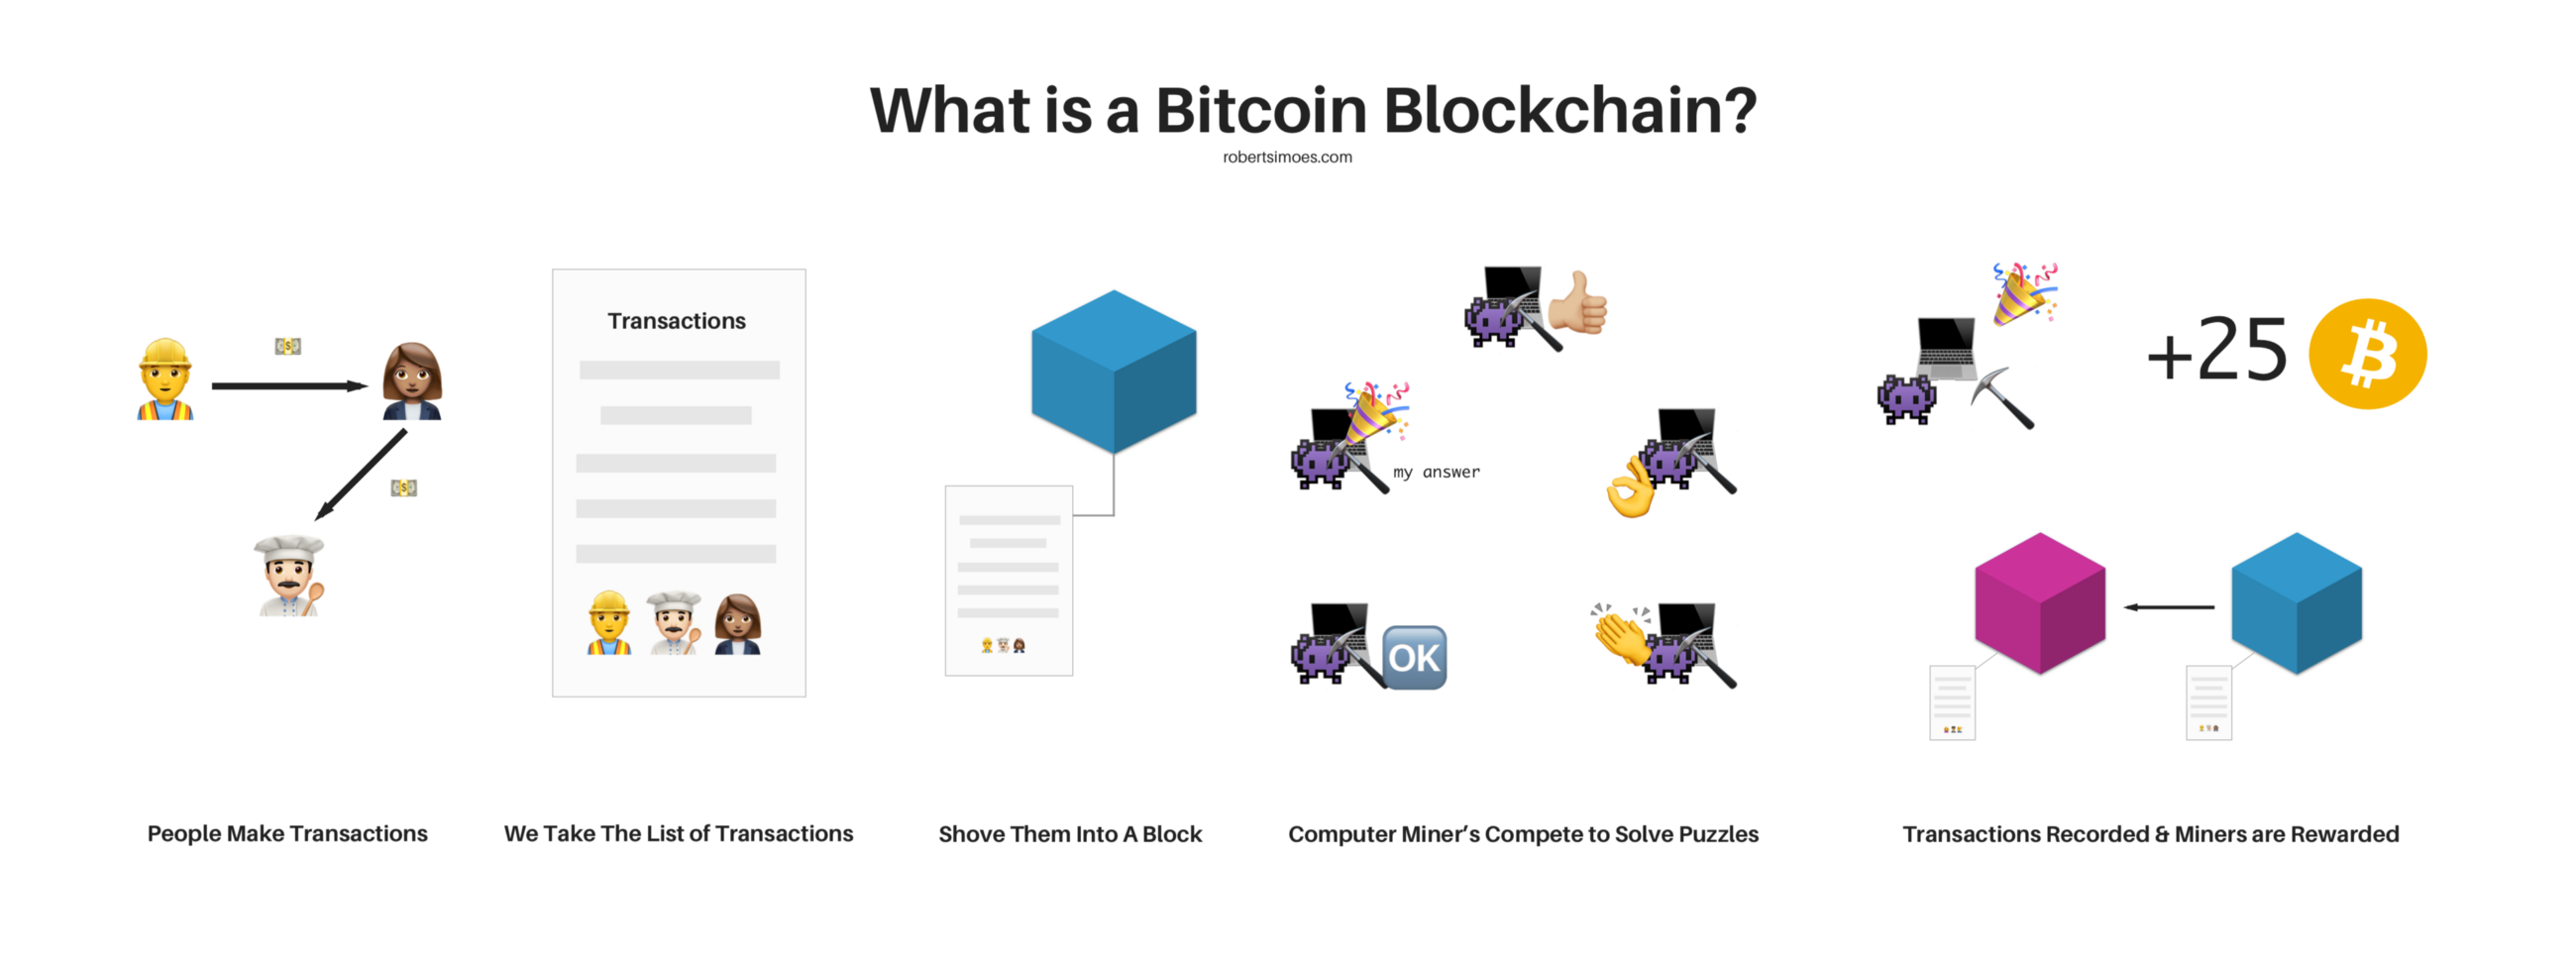 What Is A Bitcoin Blockchain A Simple Explanation For Non Techn!   ical - 